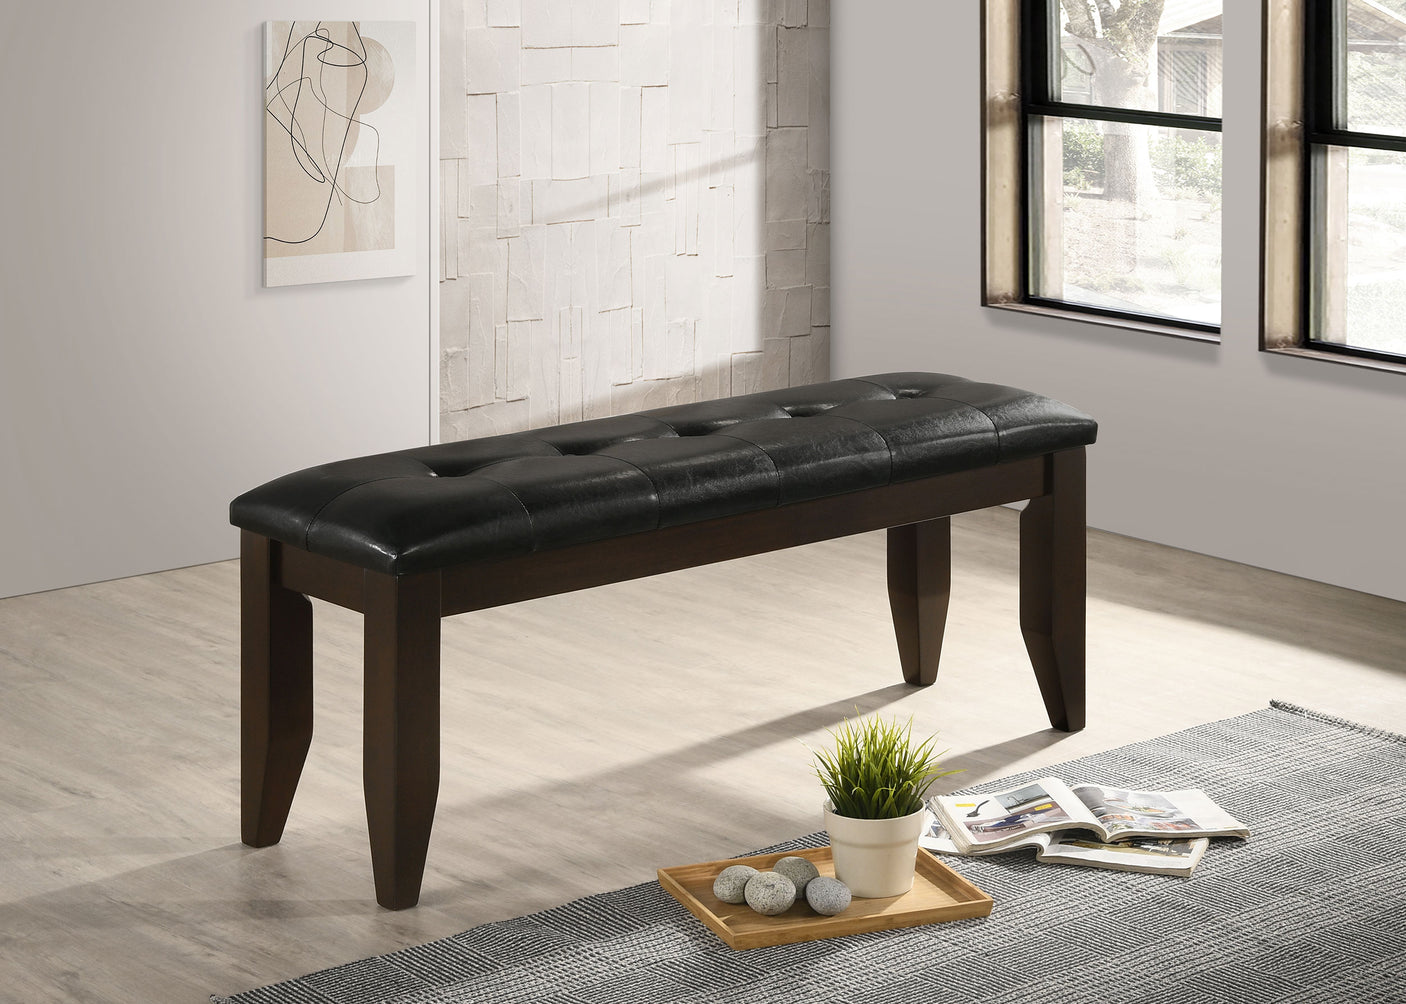 Bench - Dalila Tufted Upholstered Dining Bench Cappuccino and Black